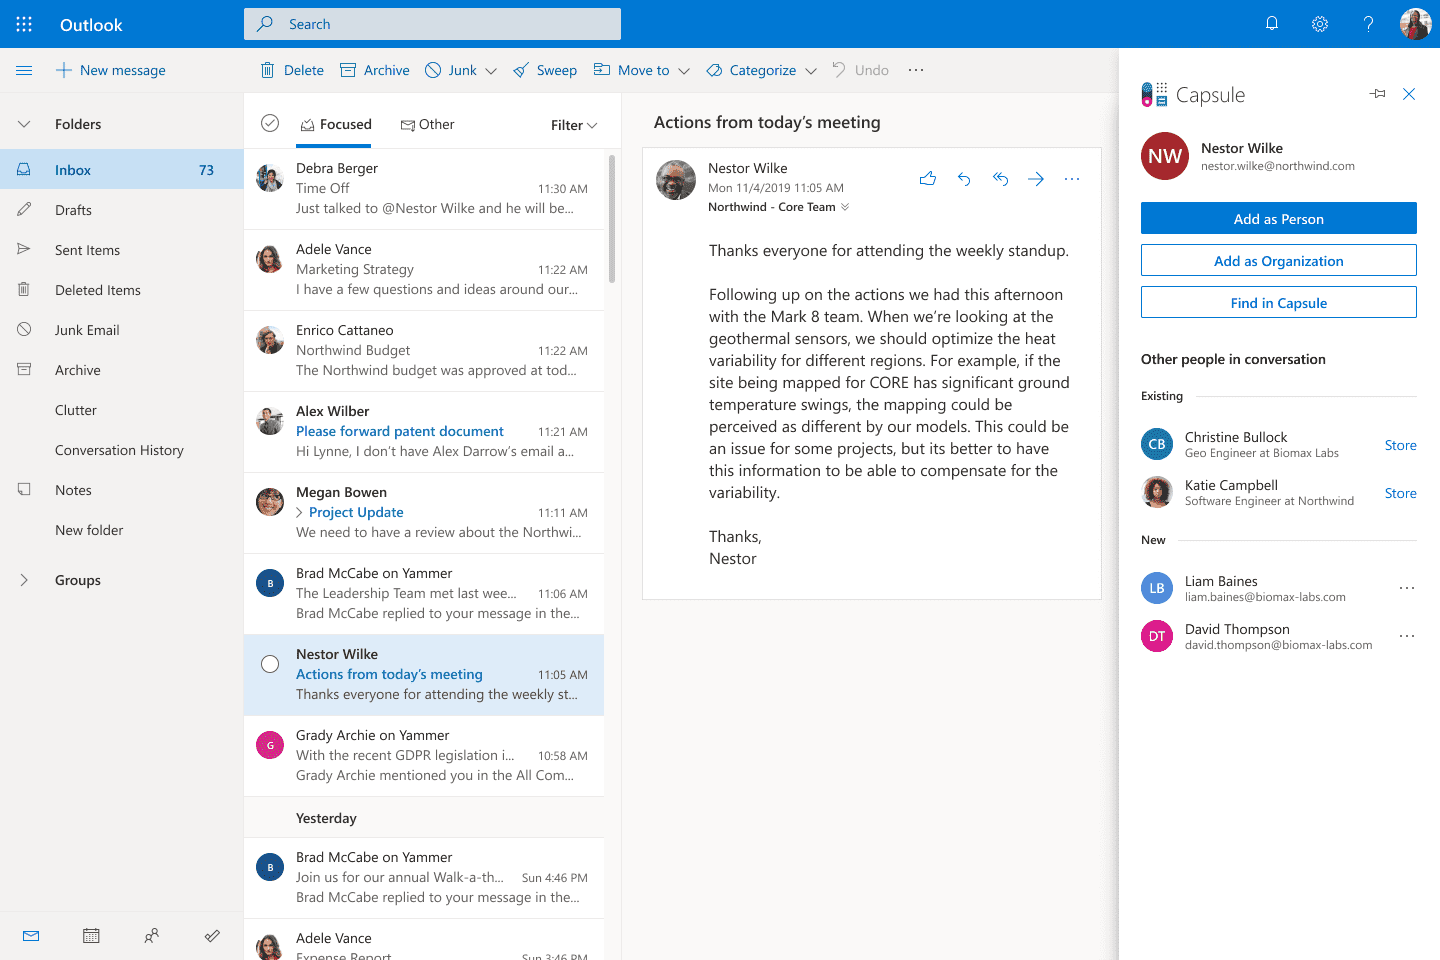 Capsule sidebar in Outlook with 'add as person or organization' or 'find in Capsule' options